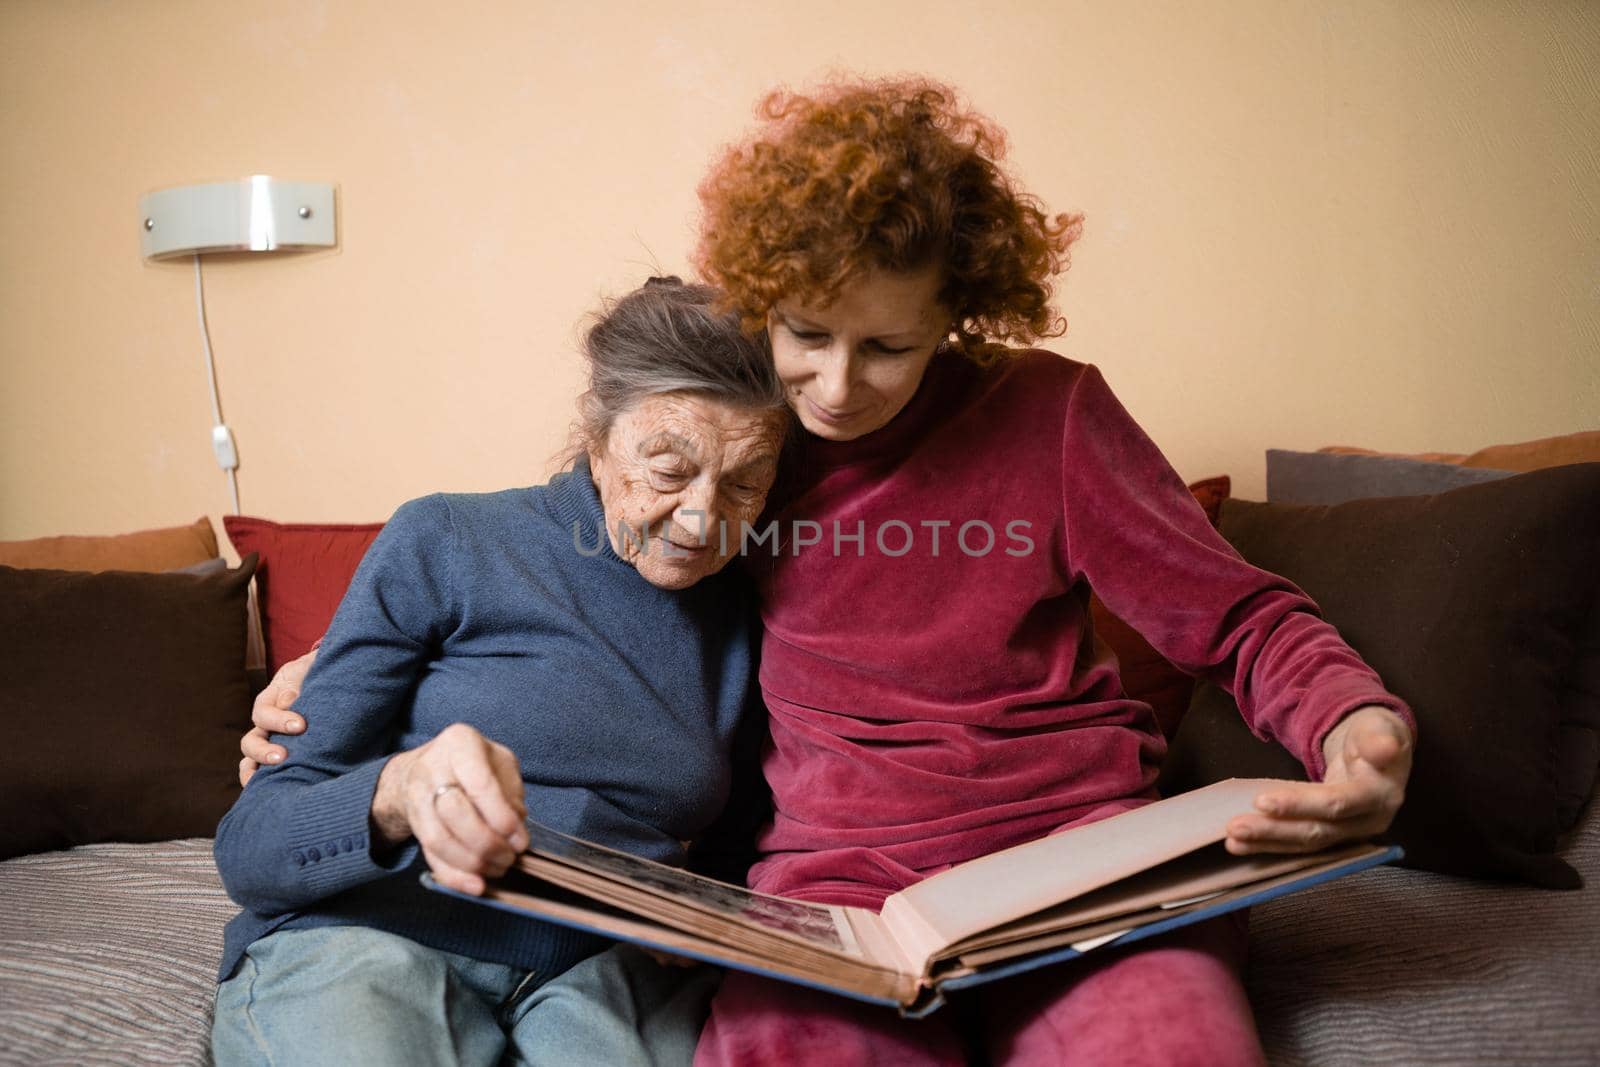 Senior woman and her adult daughter looking at photo album together on couch in living room, talking joyful discussing memories. Weekend with parents, family day, thanksgiving, mom's holiday by Tomashevska